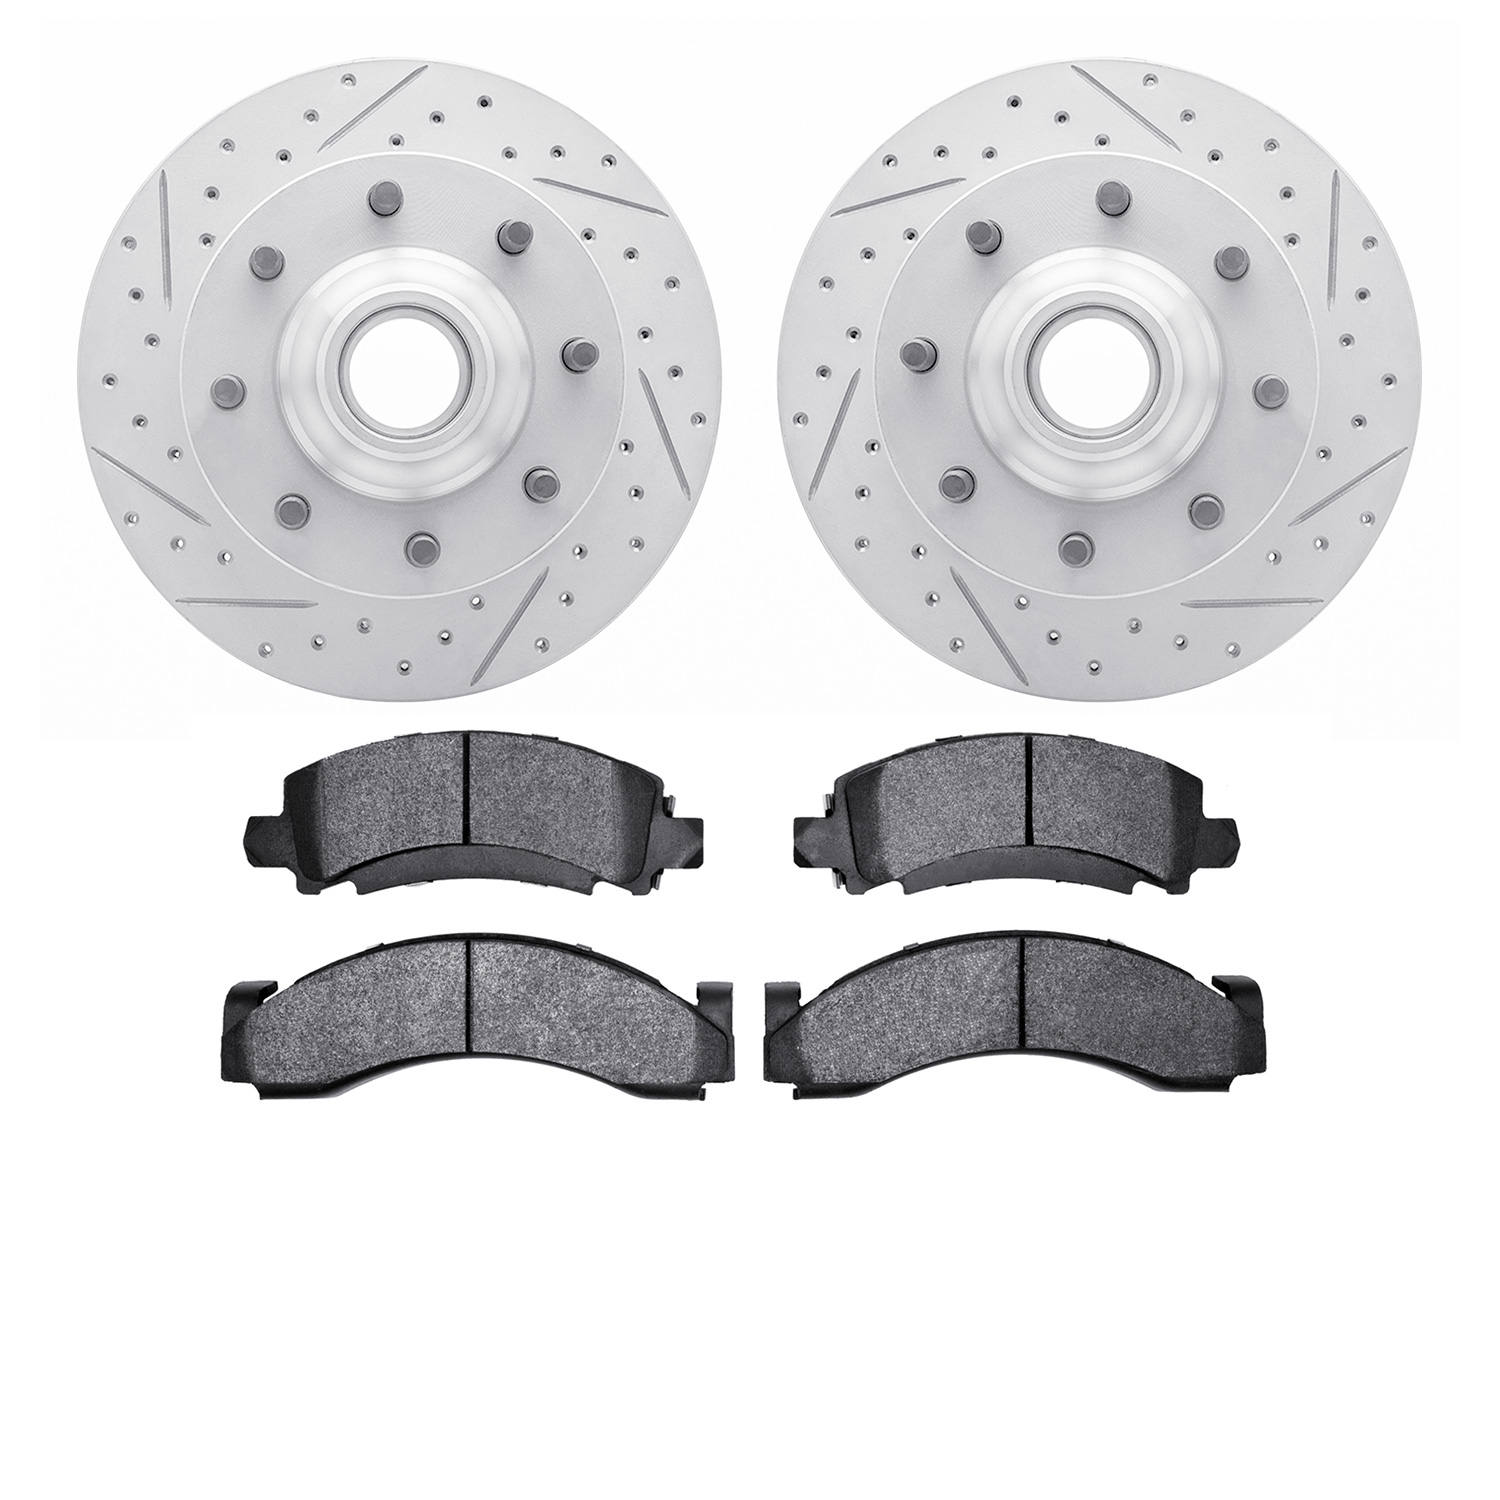 2502-48005 Geoperformance Drilled/Slotted Rotors w/5000 Advanced Brake Pads Kit, 1994-1995 GM, Position: Front